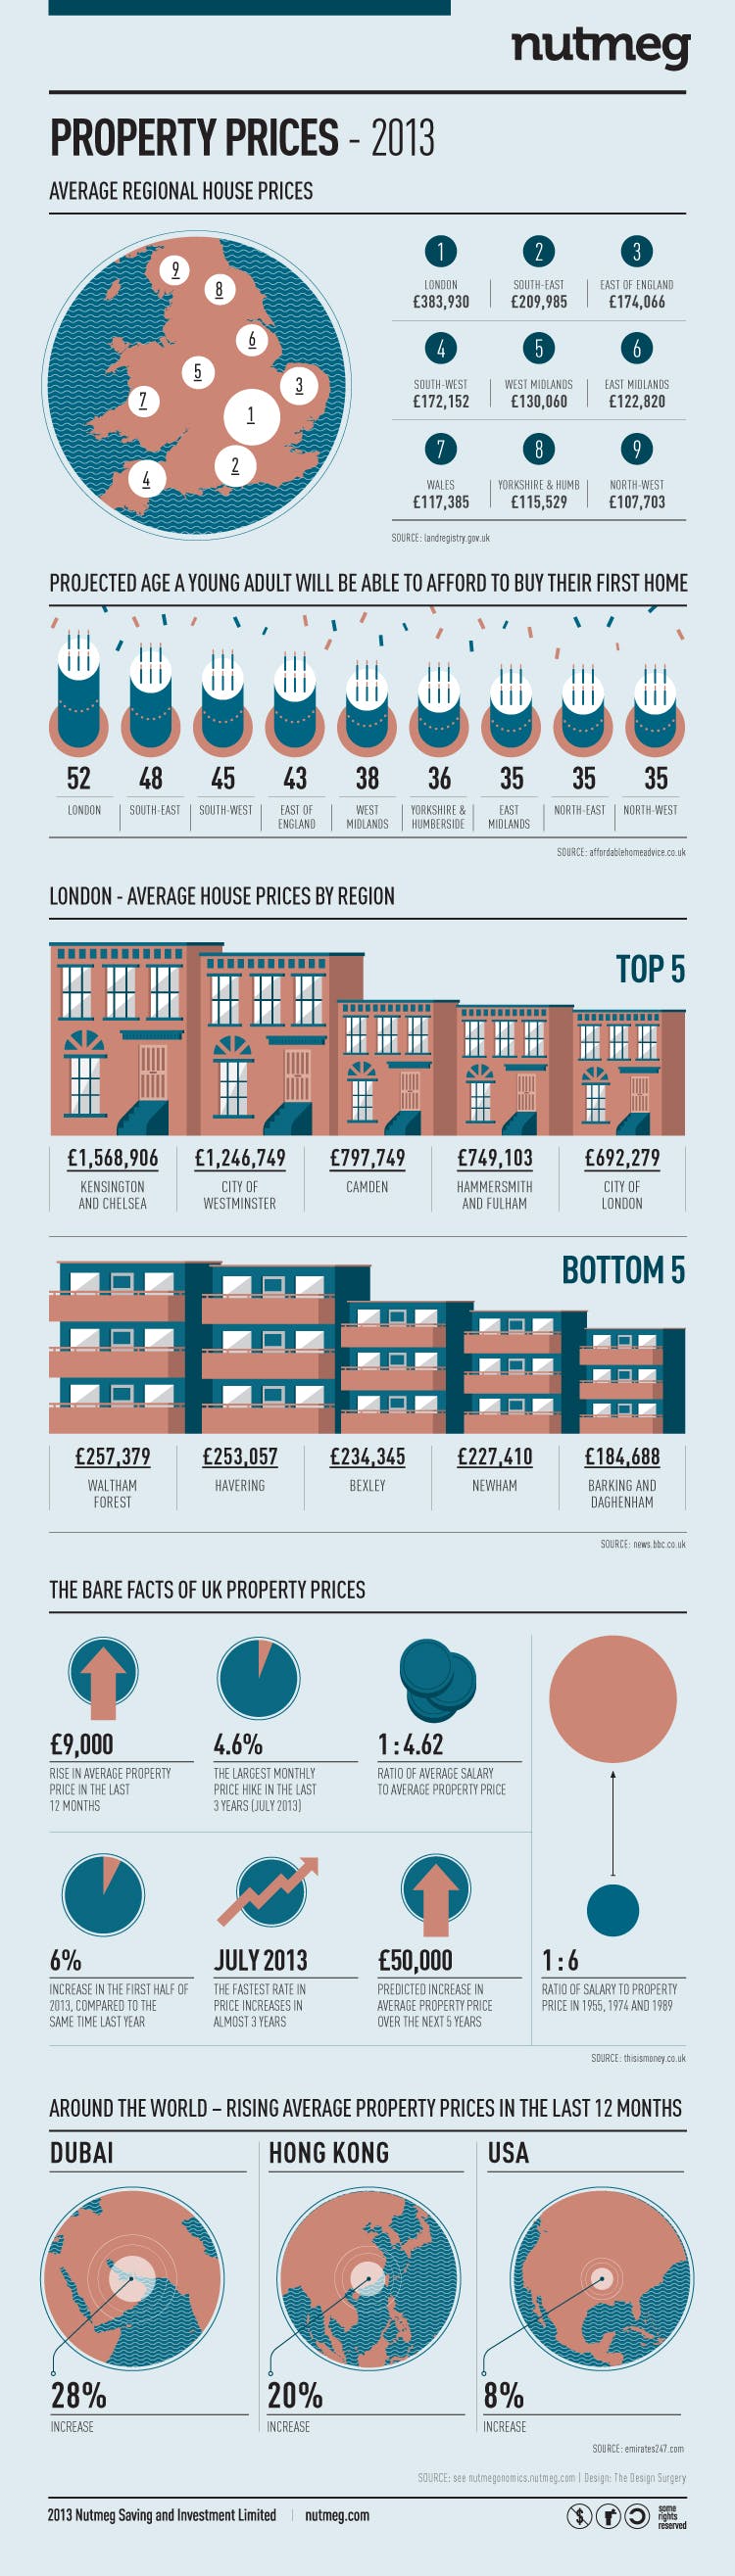 Property prices in the UK